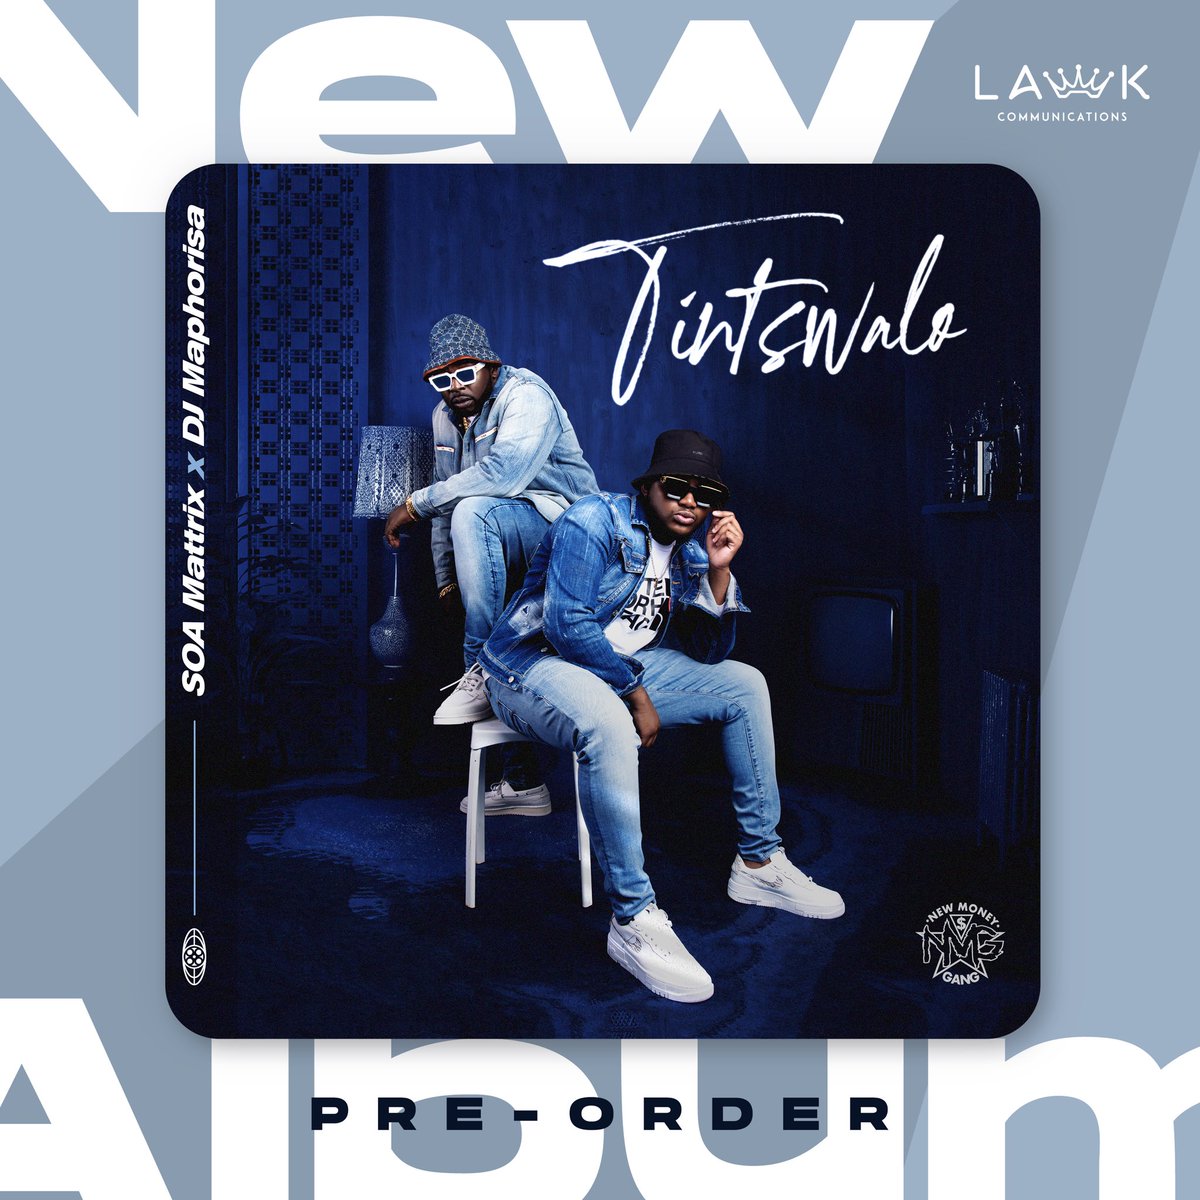 Pre-order for “Tinstwalo” available on all digital platforms🚀🚀 Link: sonymusicafrica.lnk.to/Tintswalo #lawkcommunications #lawk #artist